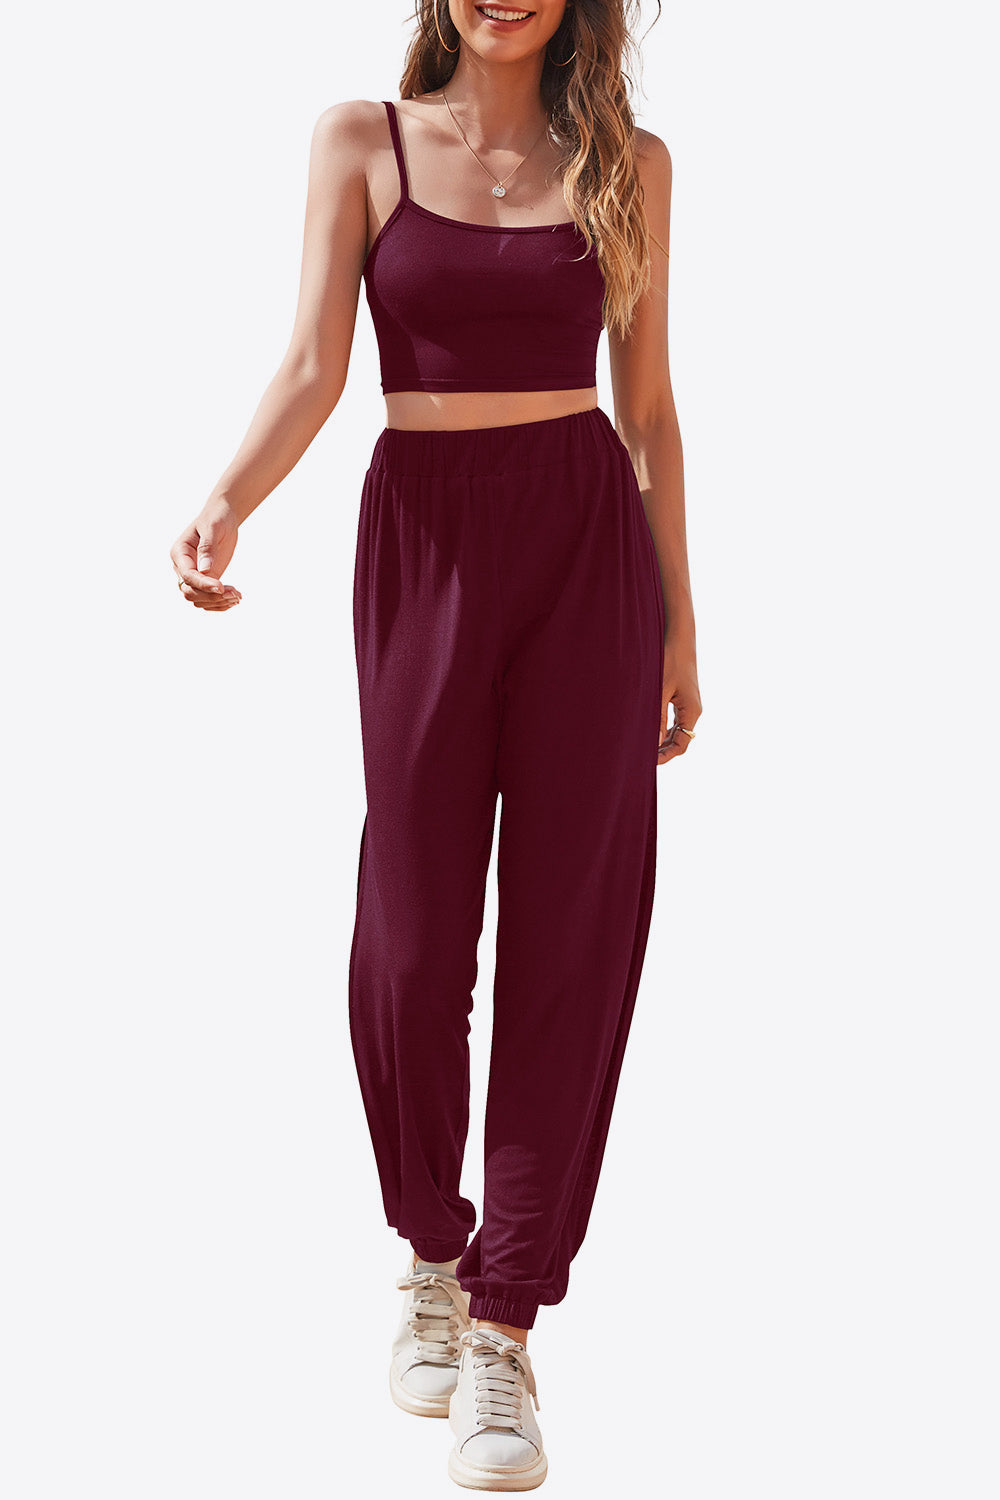 Cropped Cami w/ Side Split Jogger Outfit (4 Colors)